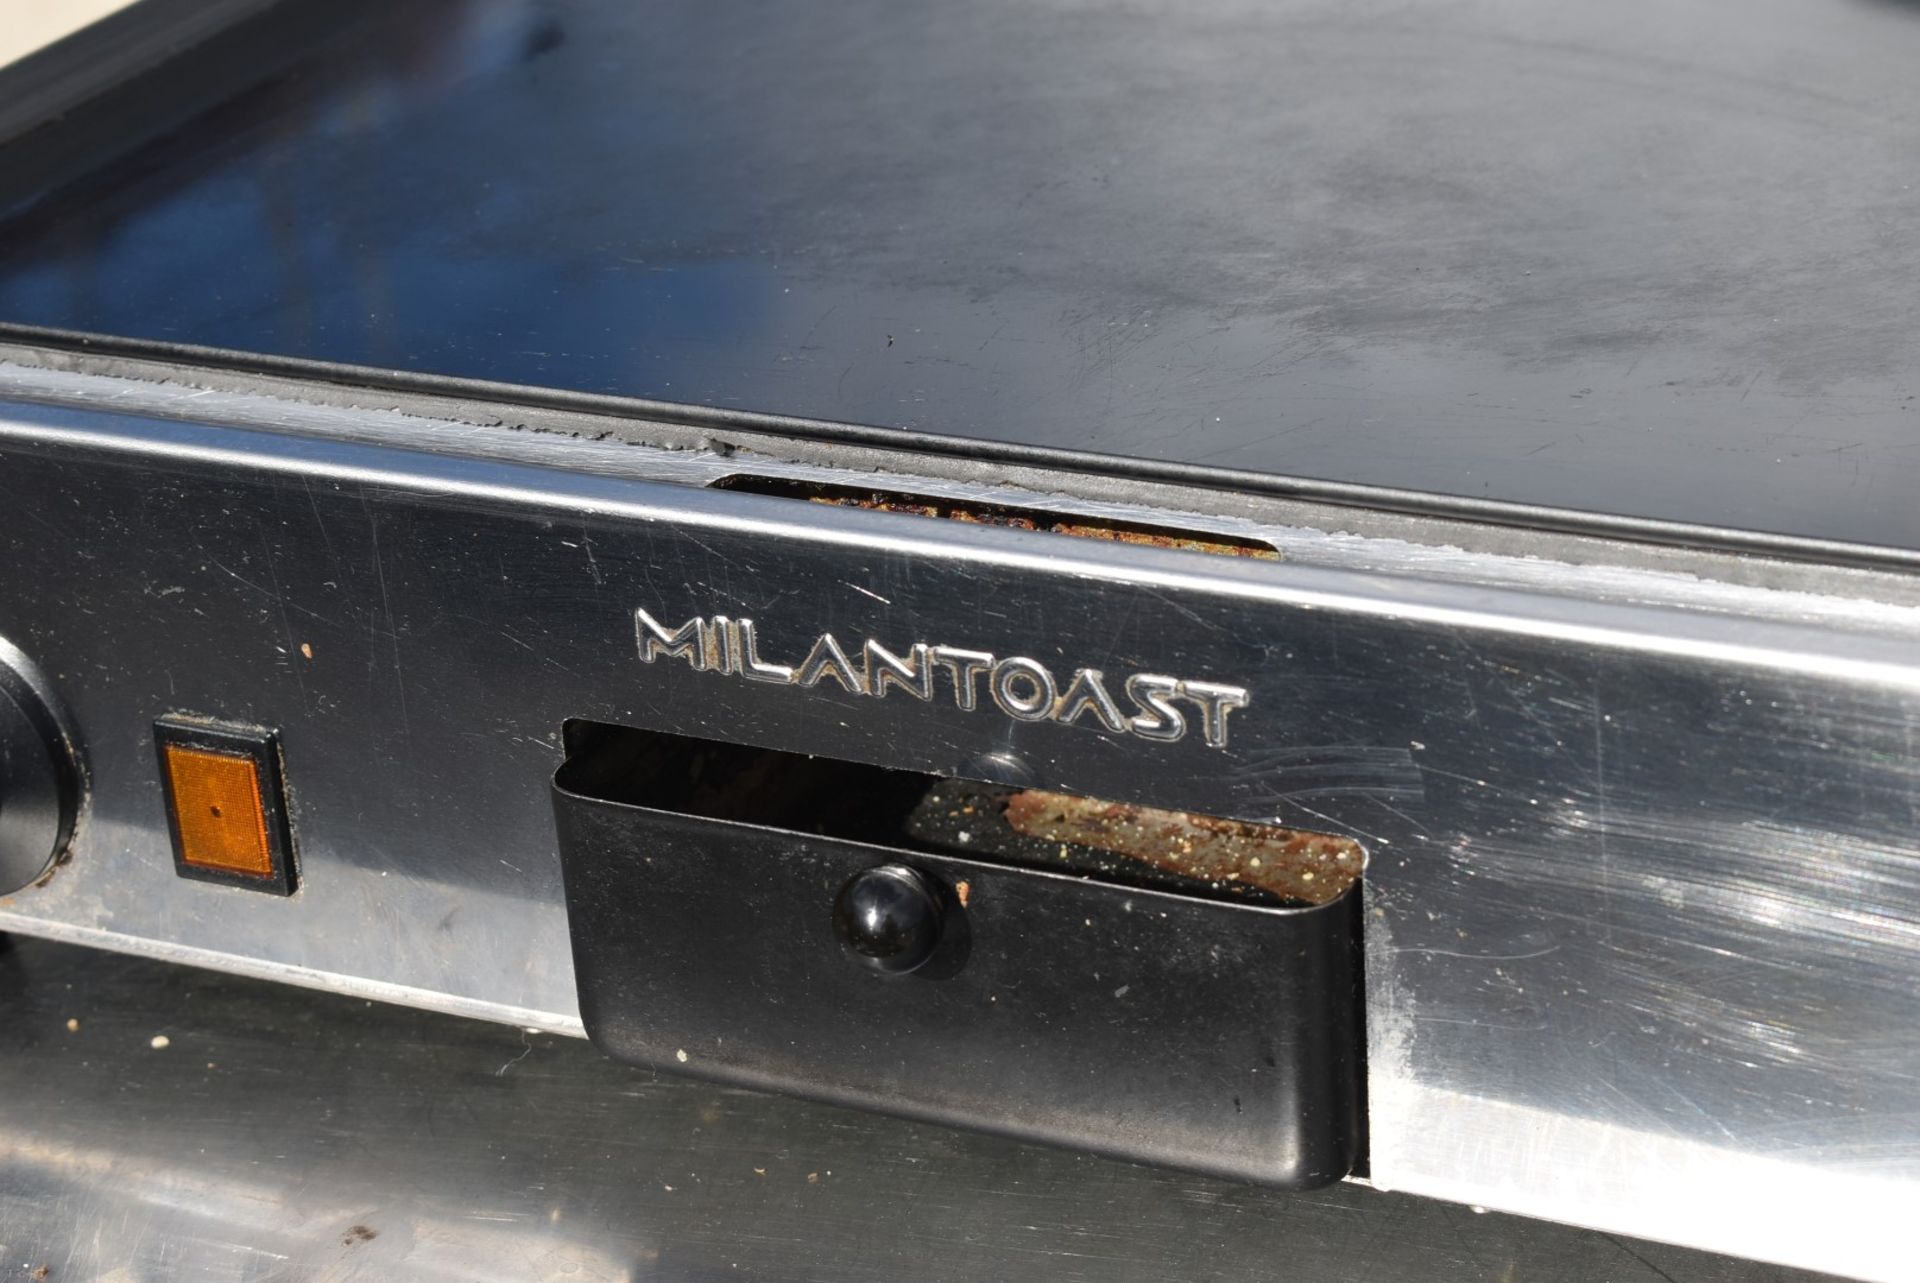 1 x Maestrowave Milantoast Countertop Ceramic Hotplate - 240v - Recently Removed From a Dark Kitchen - Image 9 of 11